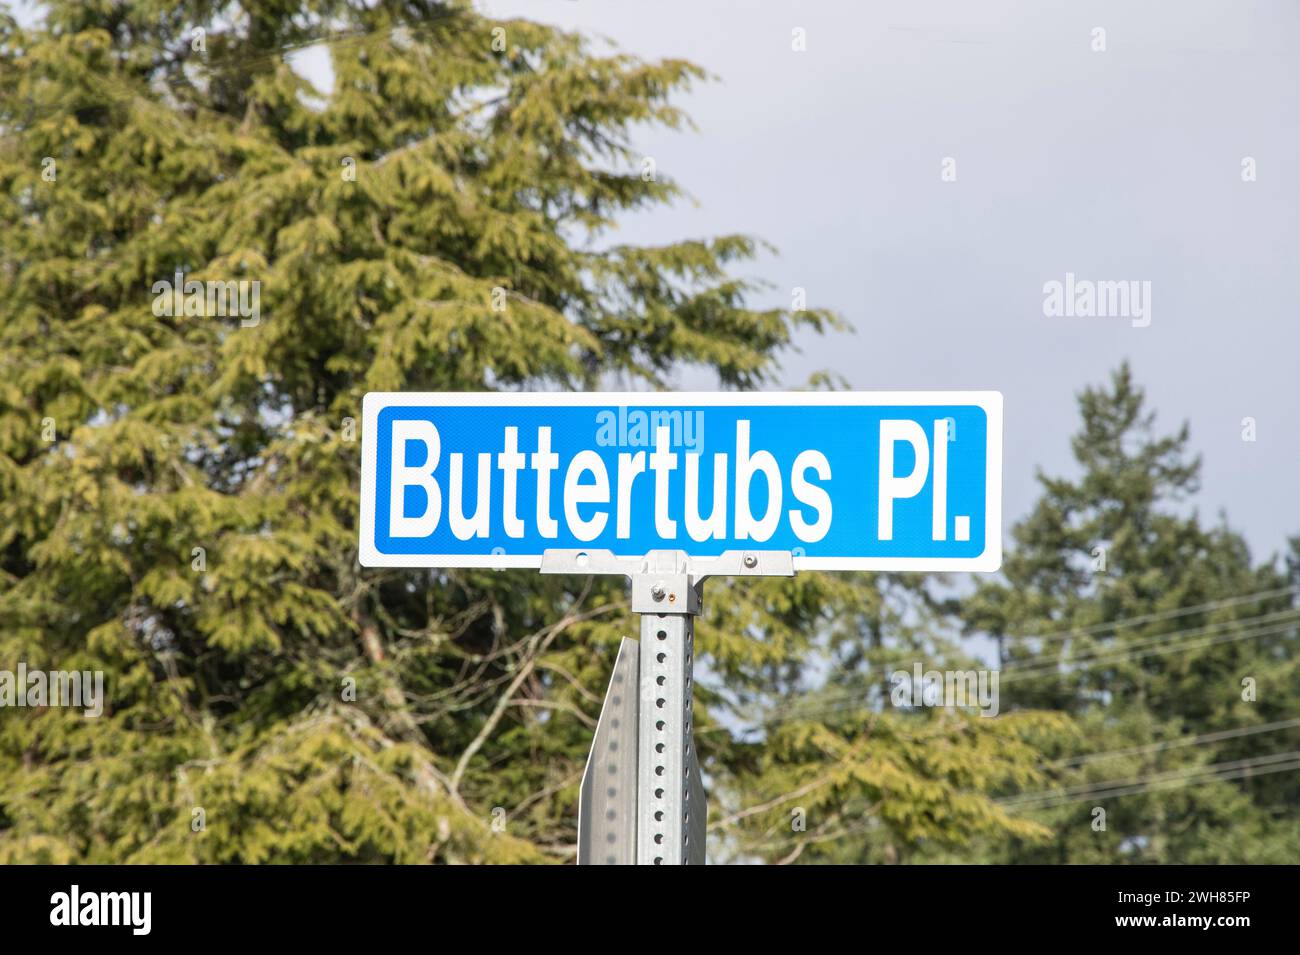 Buttertubs Place street sign in Nanaimo, British Columbia, Canada Stock Photo